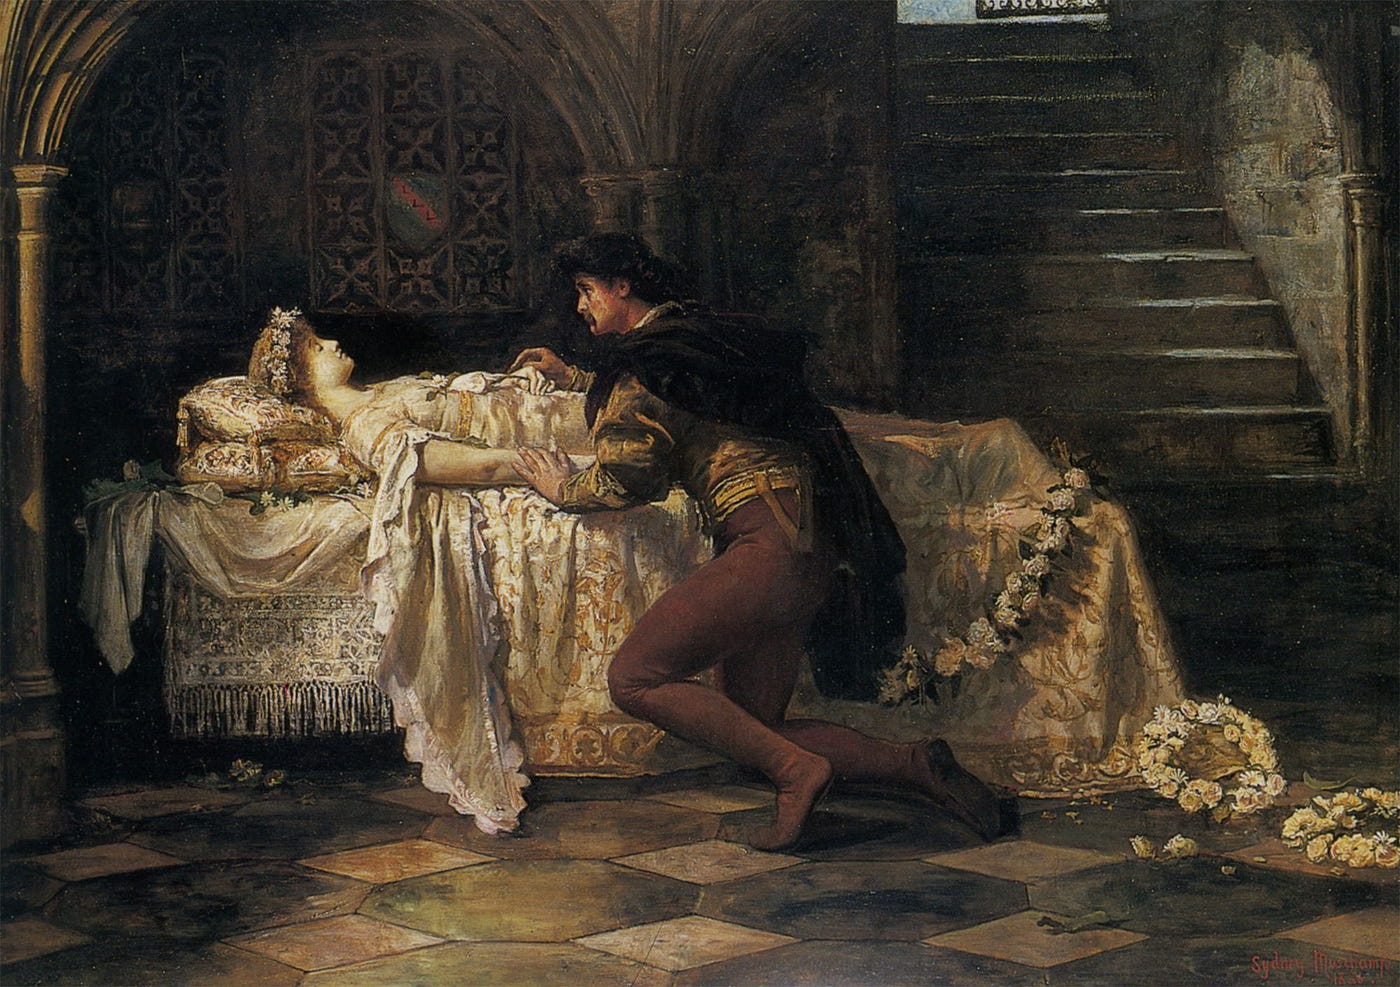 A Brief Literary Appraisal Of Romeo Juliet By William Shakespeare